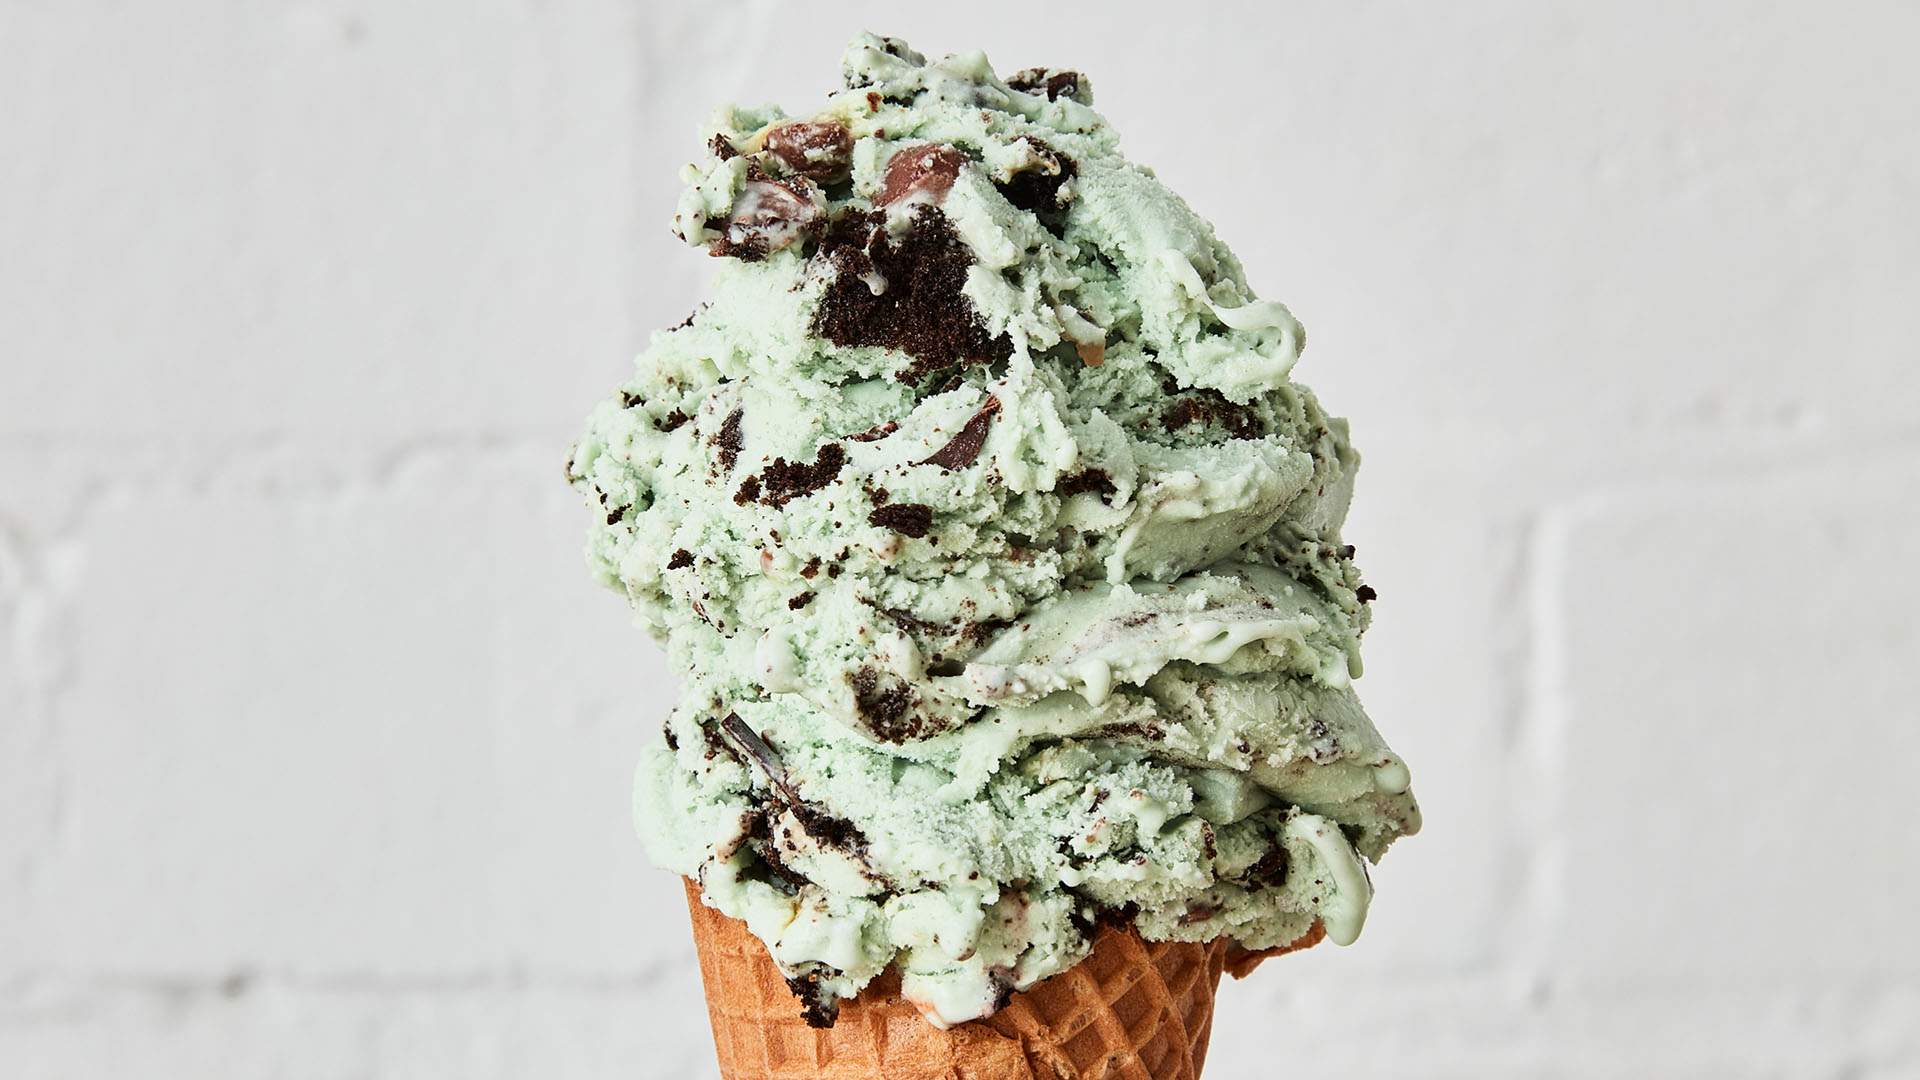 Gelatissimo Is Scooping Up Mint Chocolate Gelato Filled with Mini Easter Eggs for the Next Month